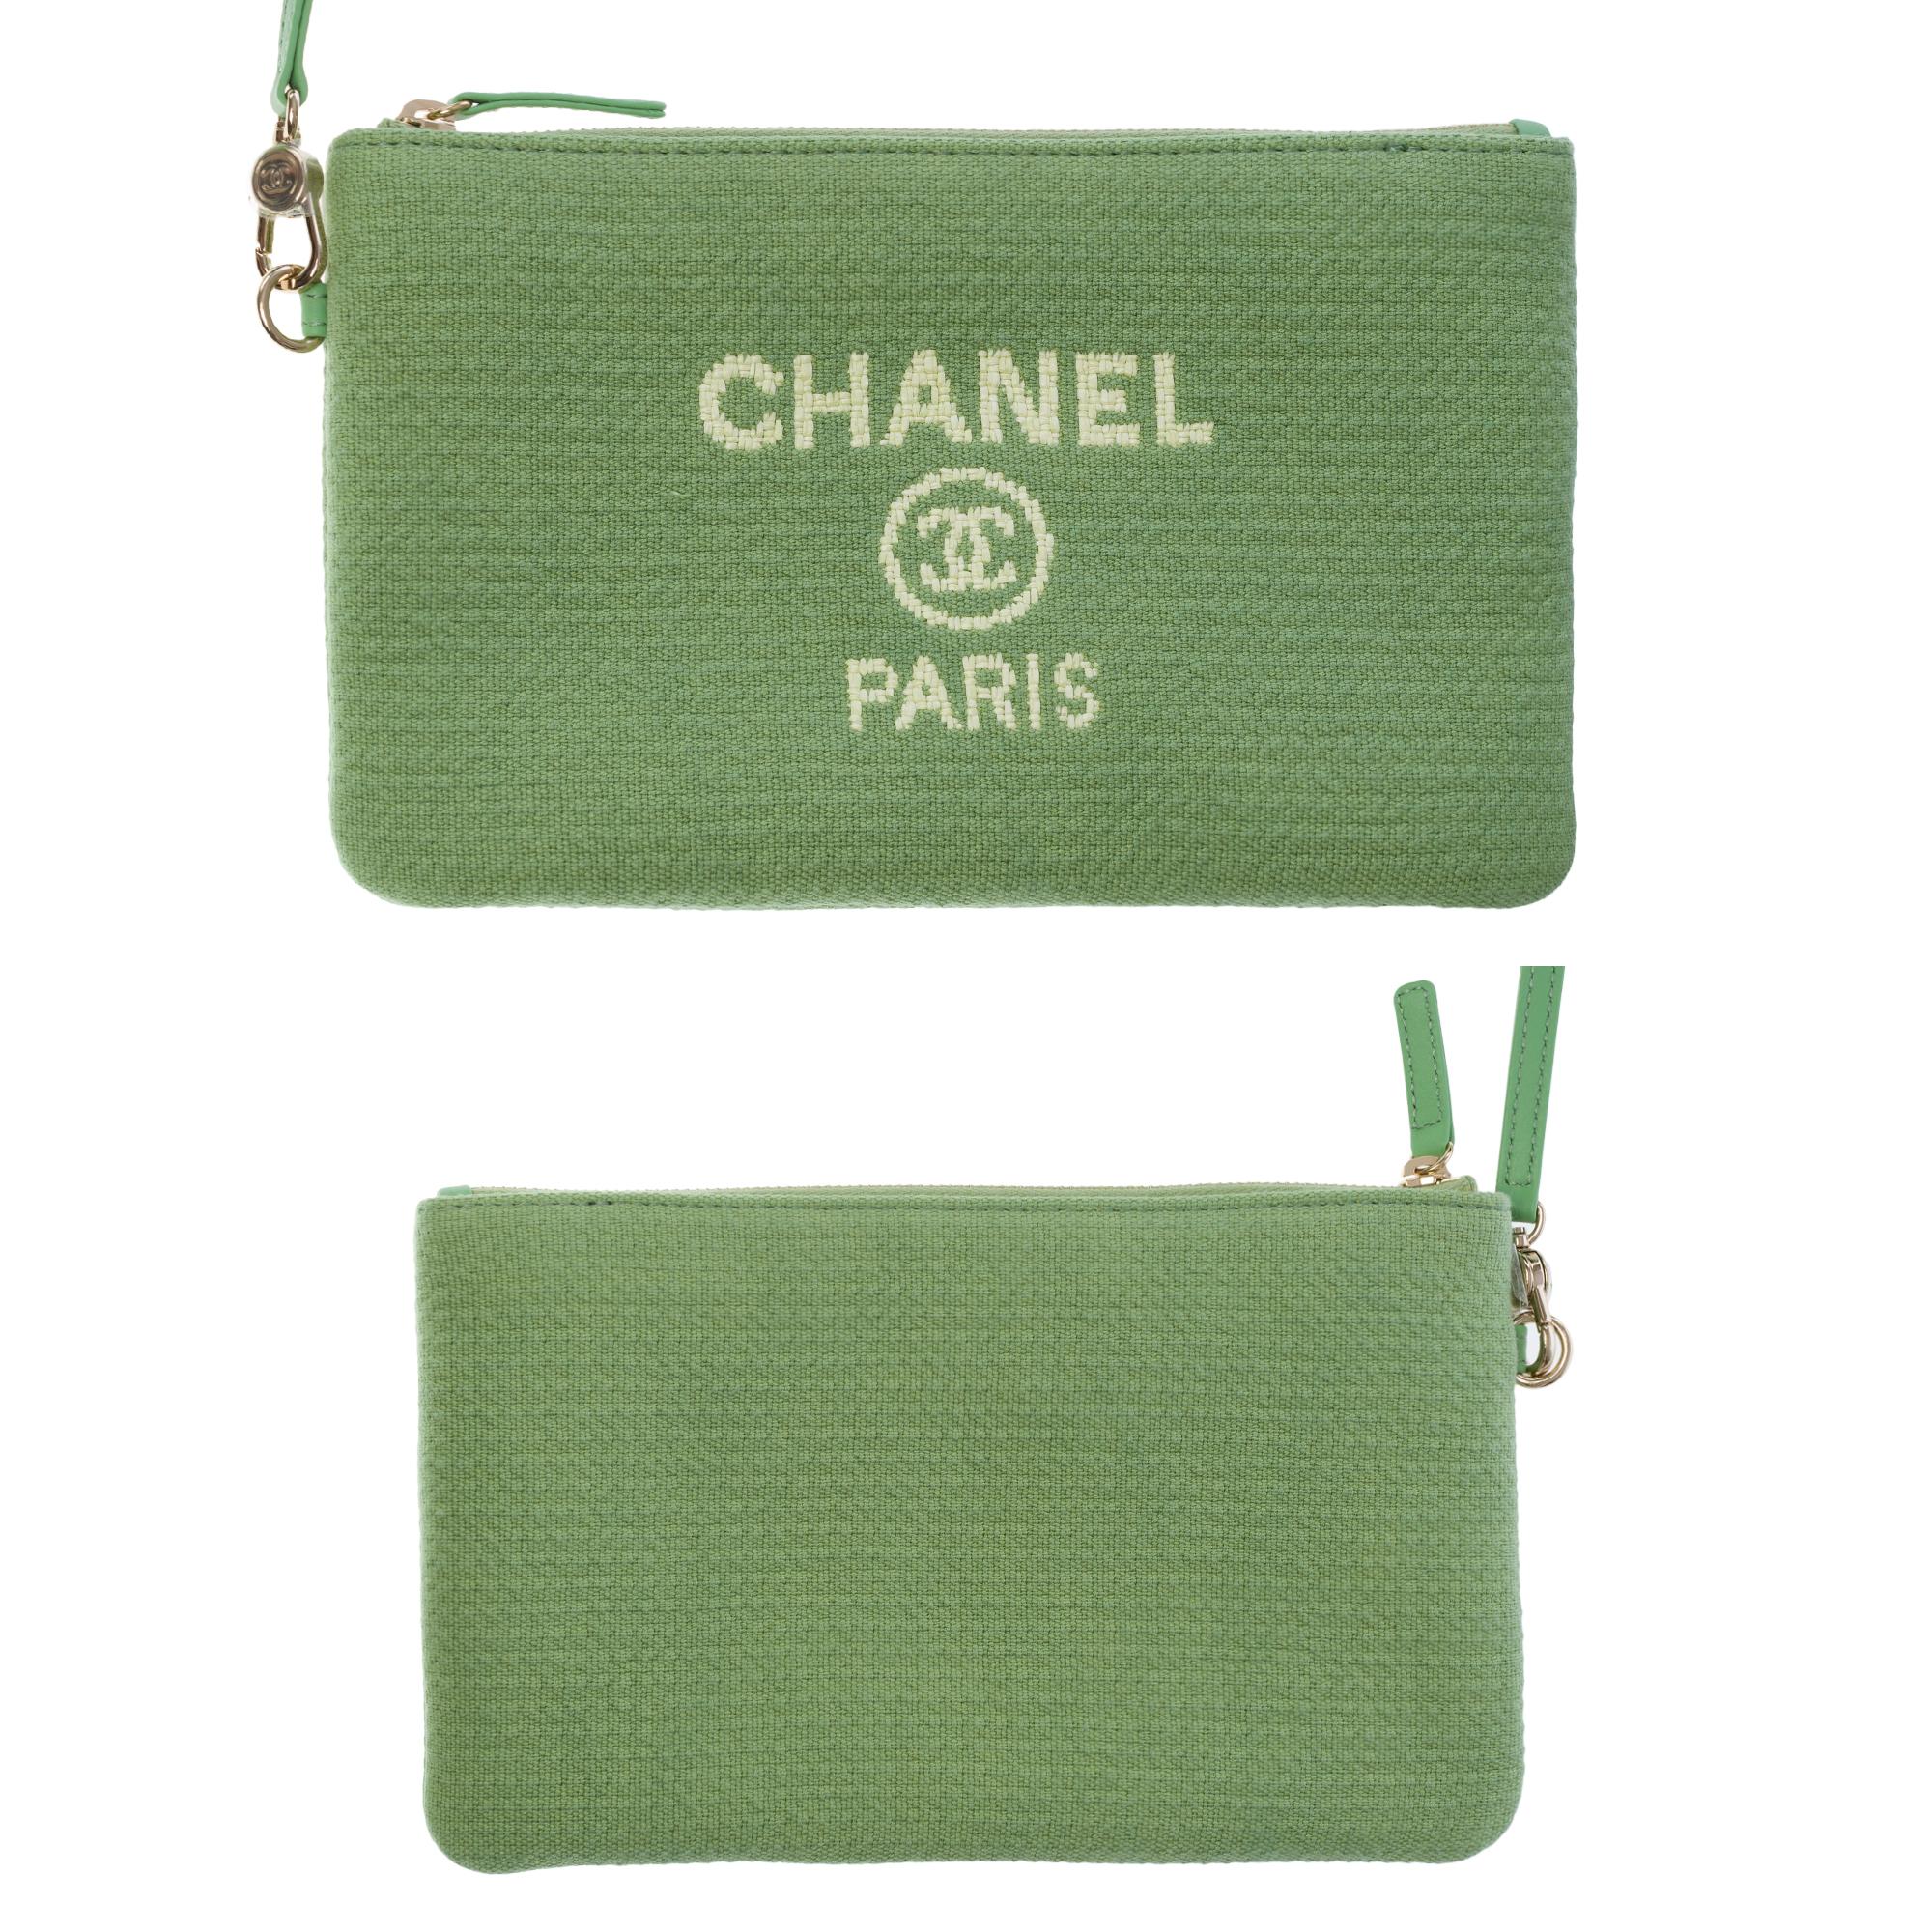 New Amazing limited edition Chanel Deauville Tote bag in Green canvas, SHW For Sale 11